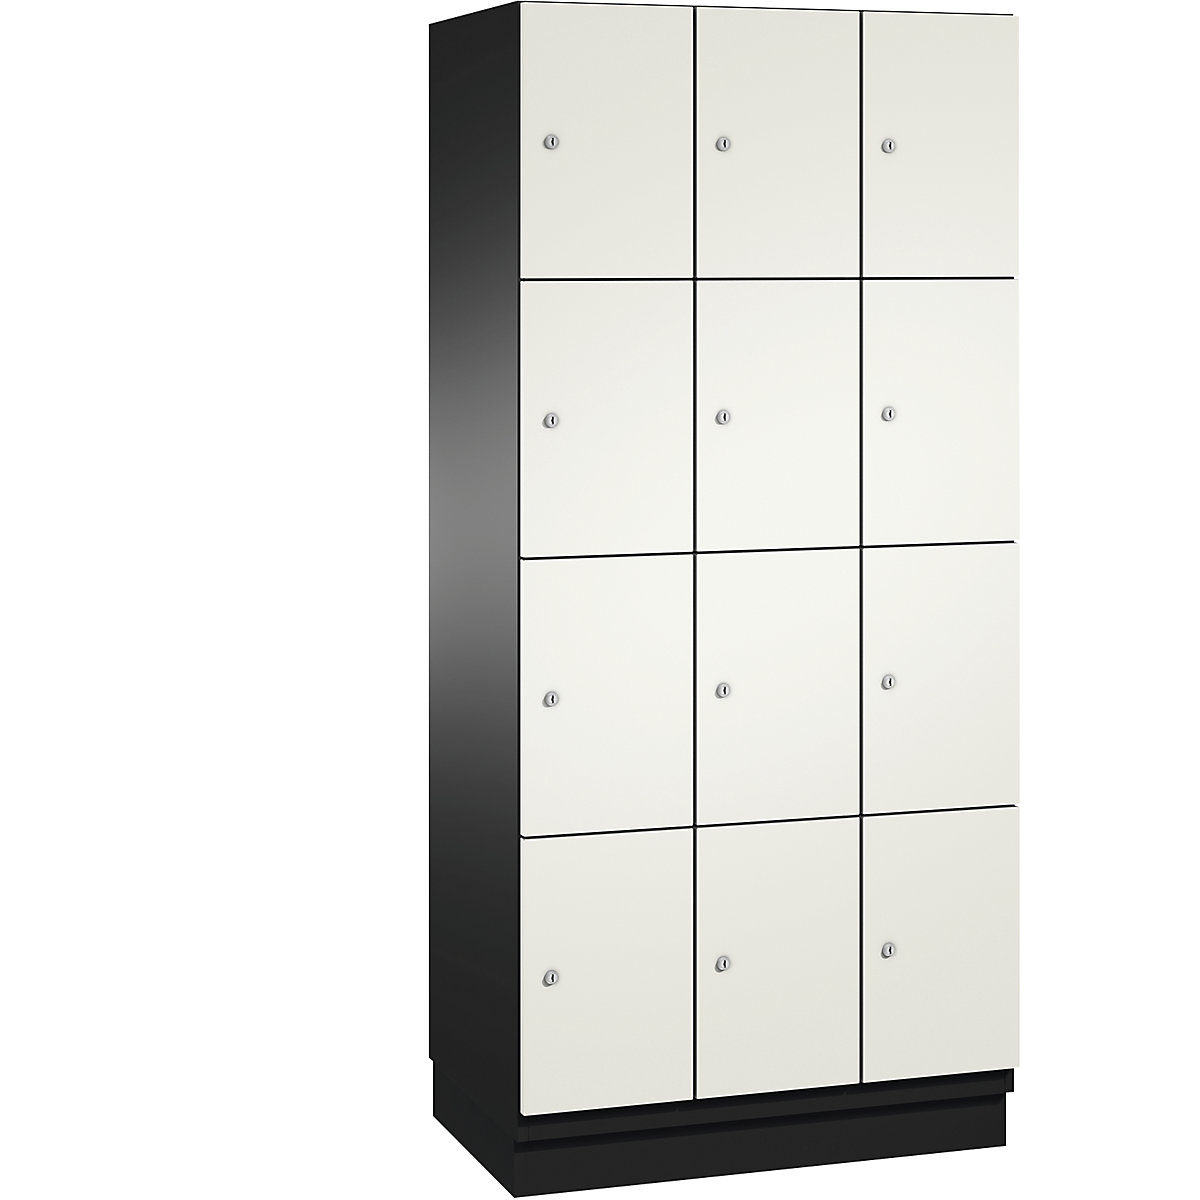 CAMBIO compartment locker with sheet steel doors – C+P, 12 compartments, width 900 mm, body black grey / door pure white-3